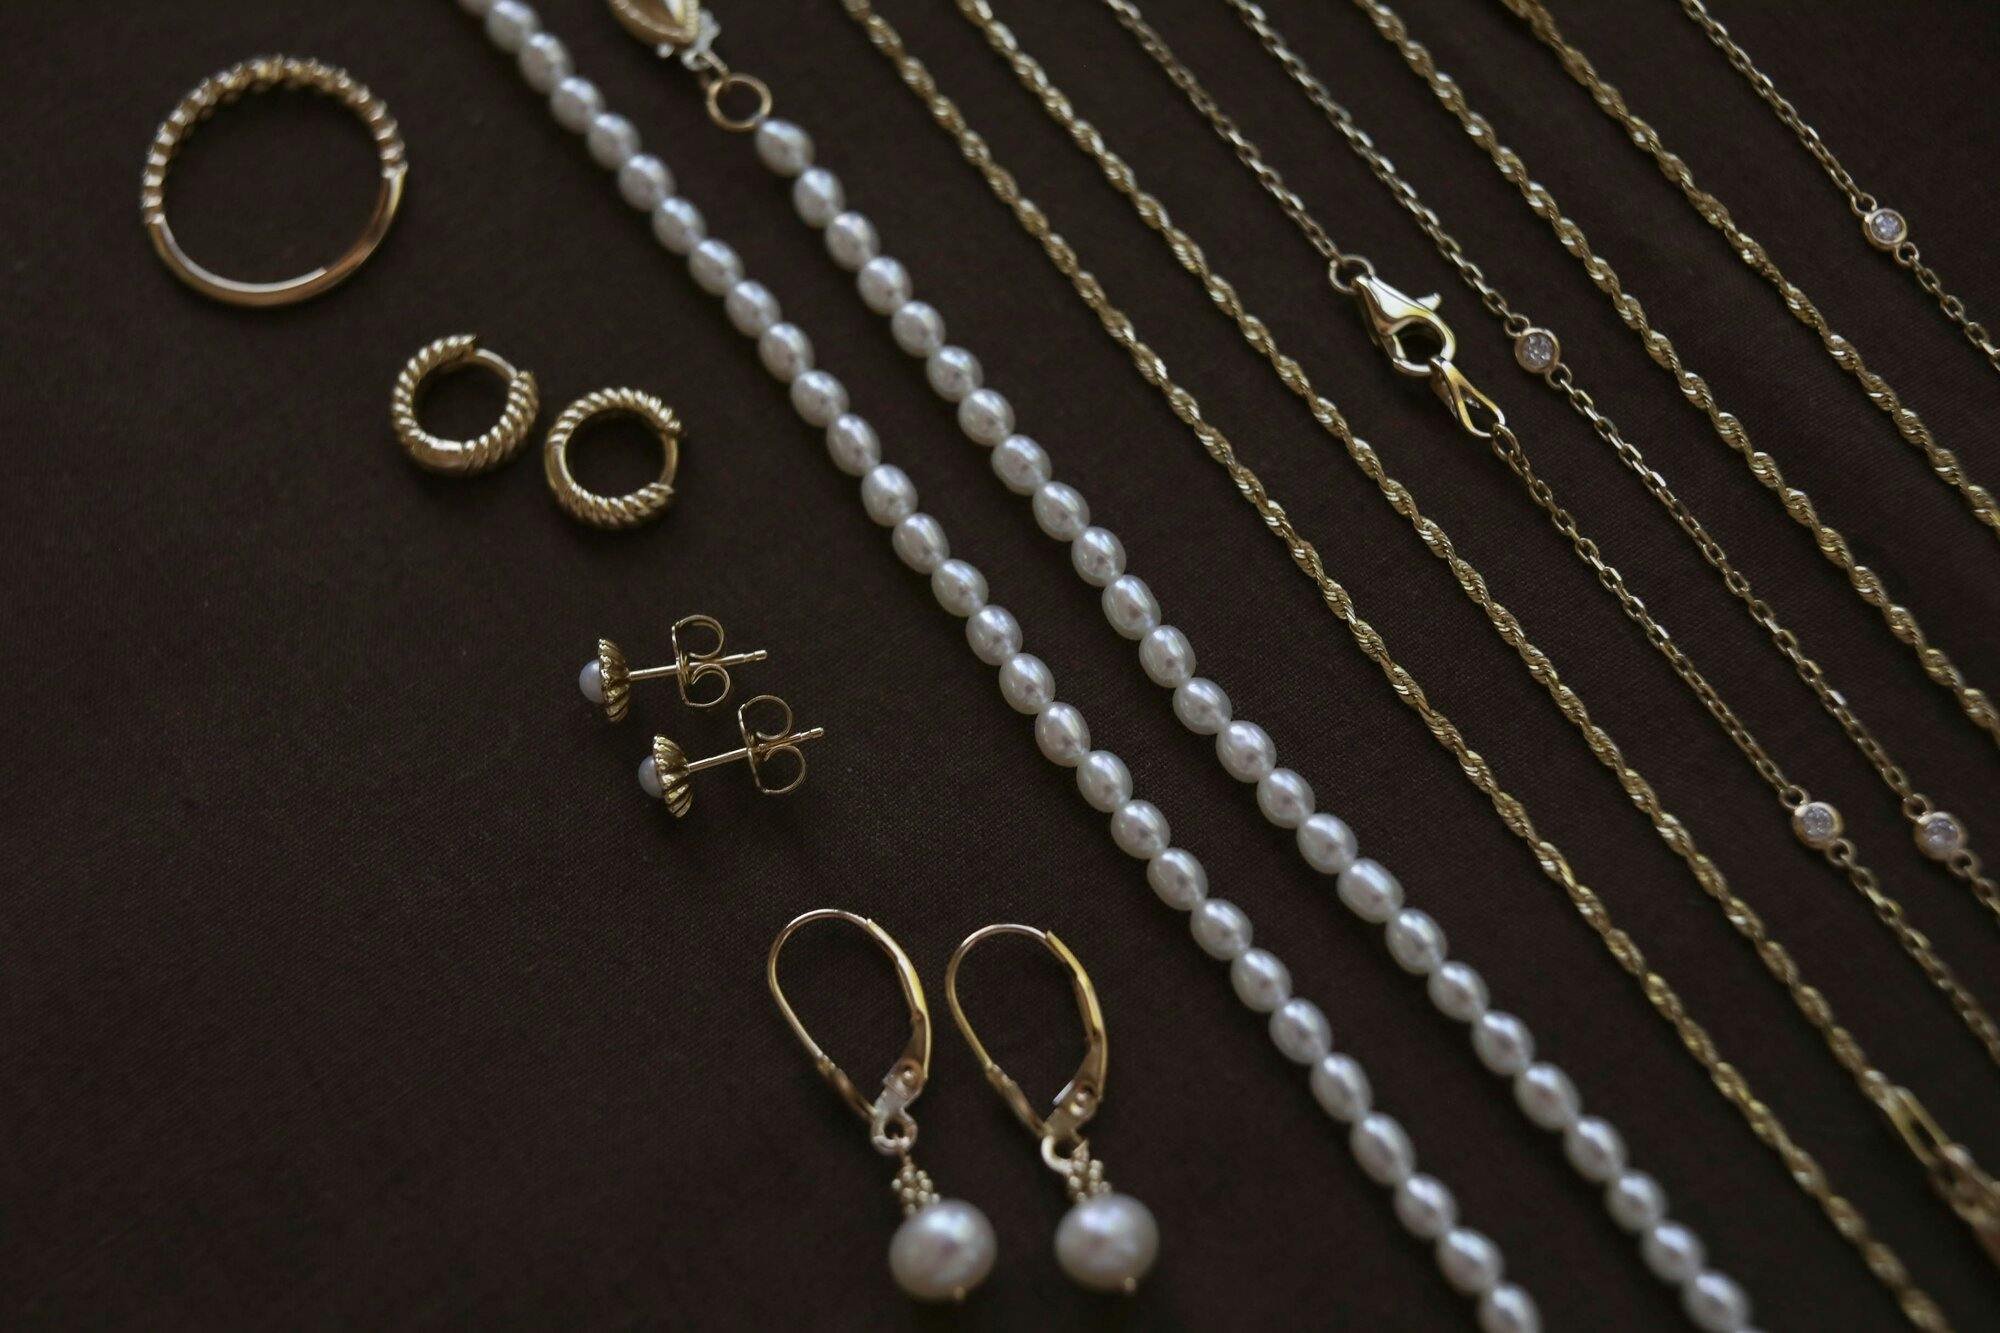 group shot of jewelry